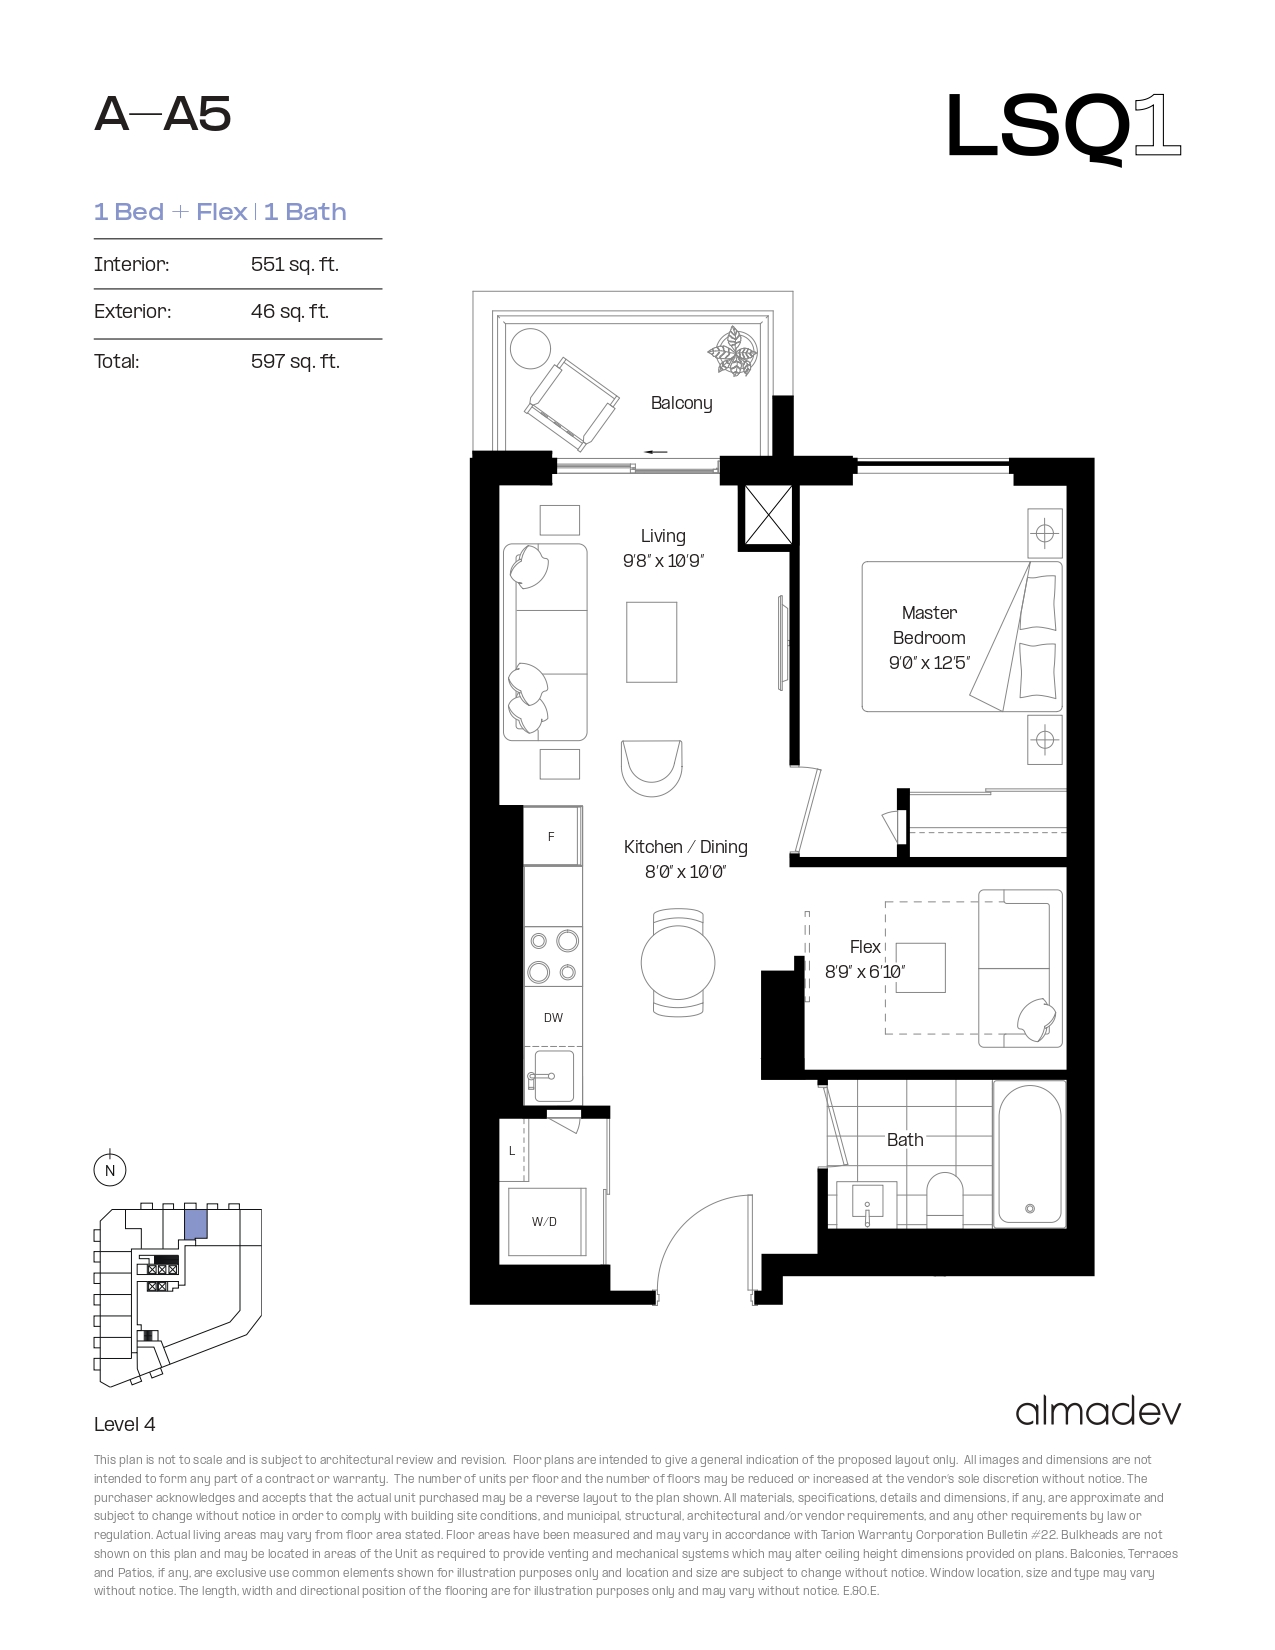 A-A5 Floor Plan of LSQ Condos with undefined beds